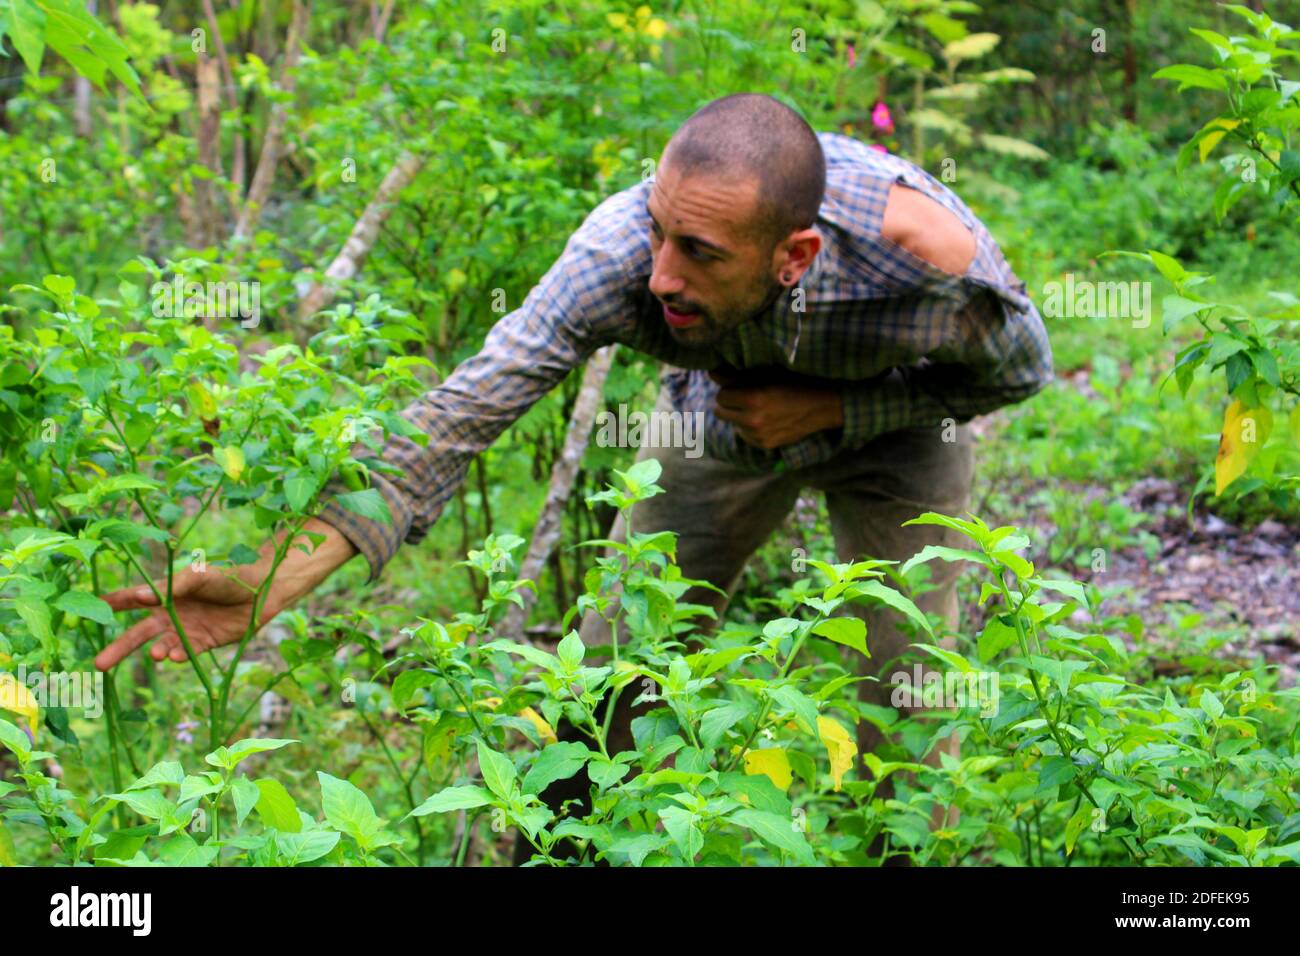 A man is collecting seeds from plants on the farm. Stock Photo